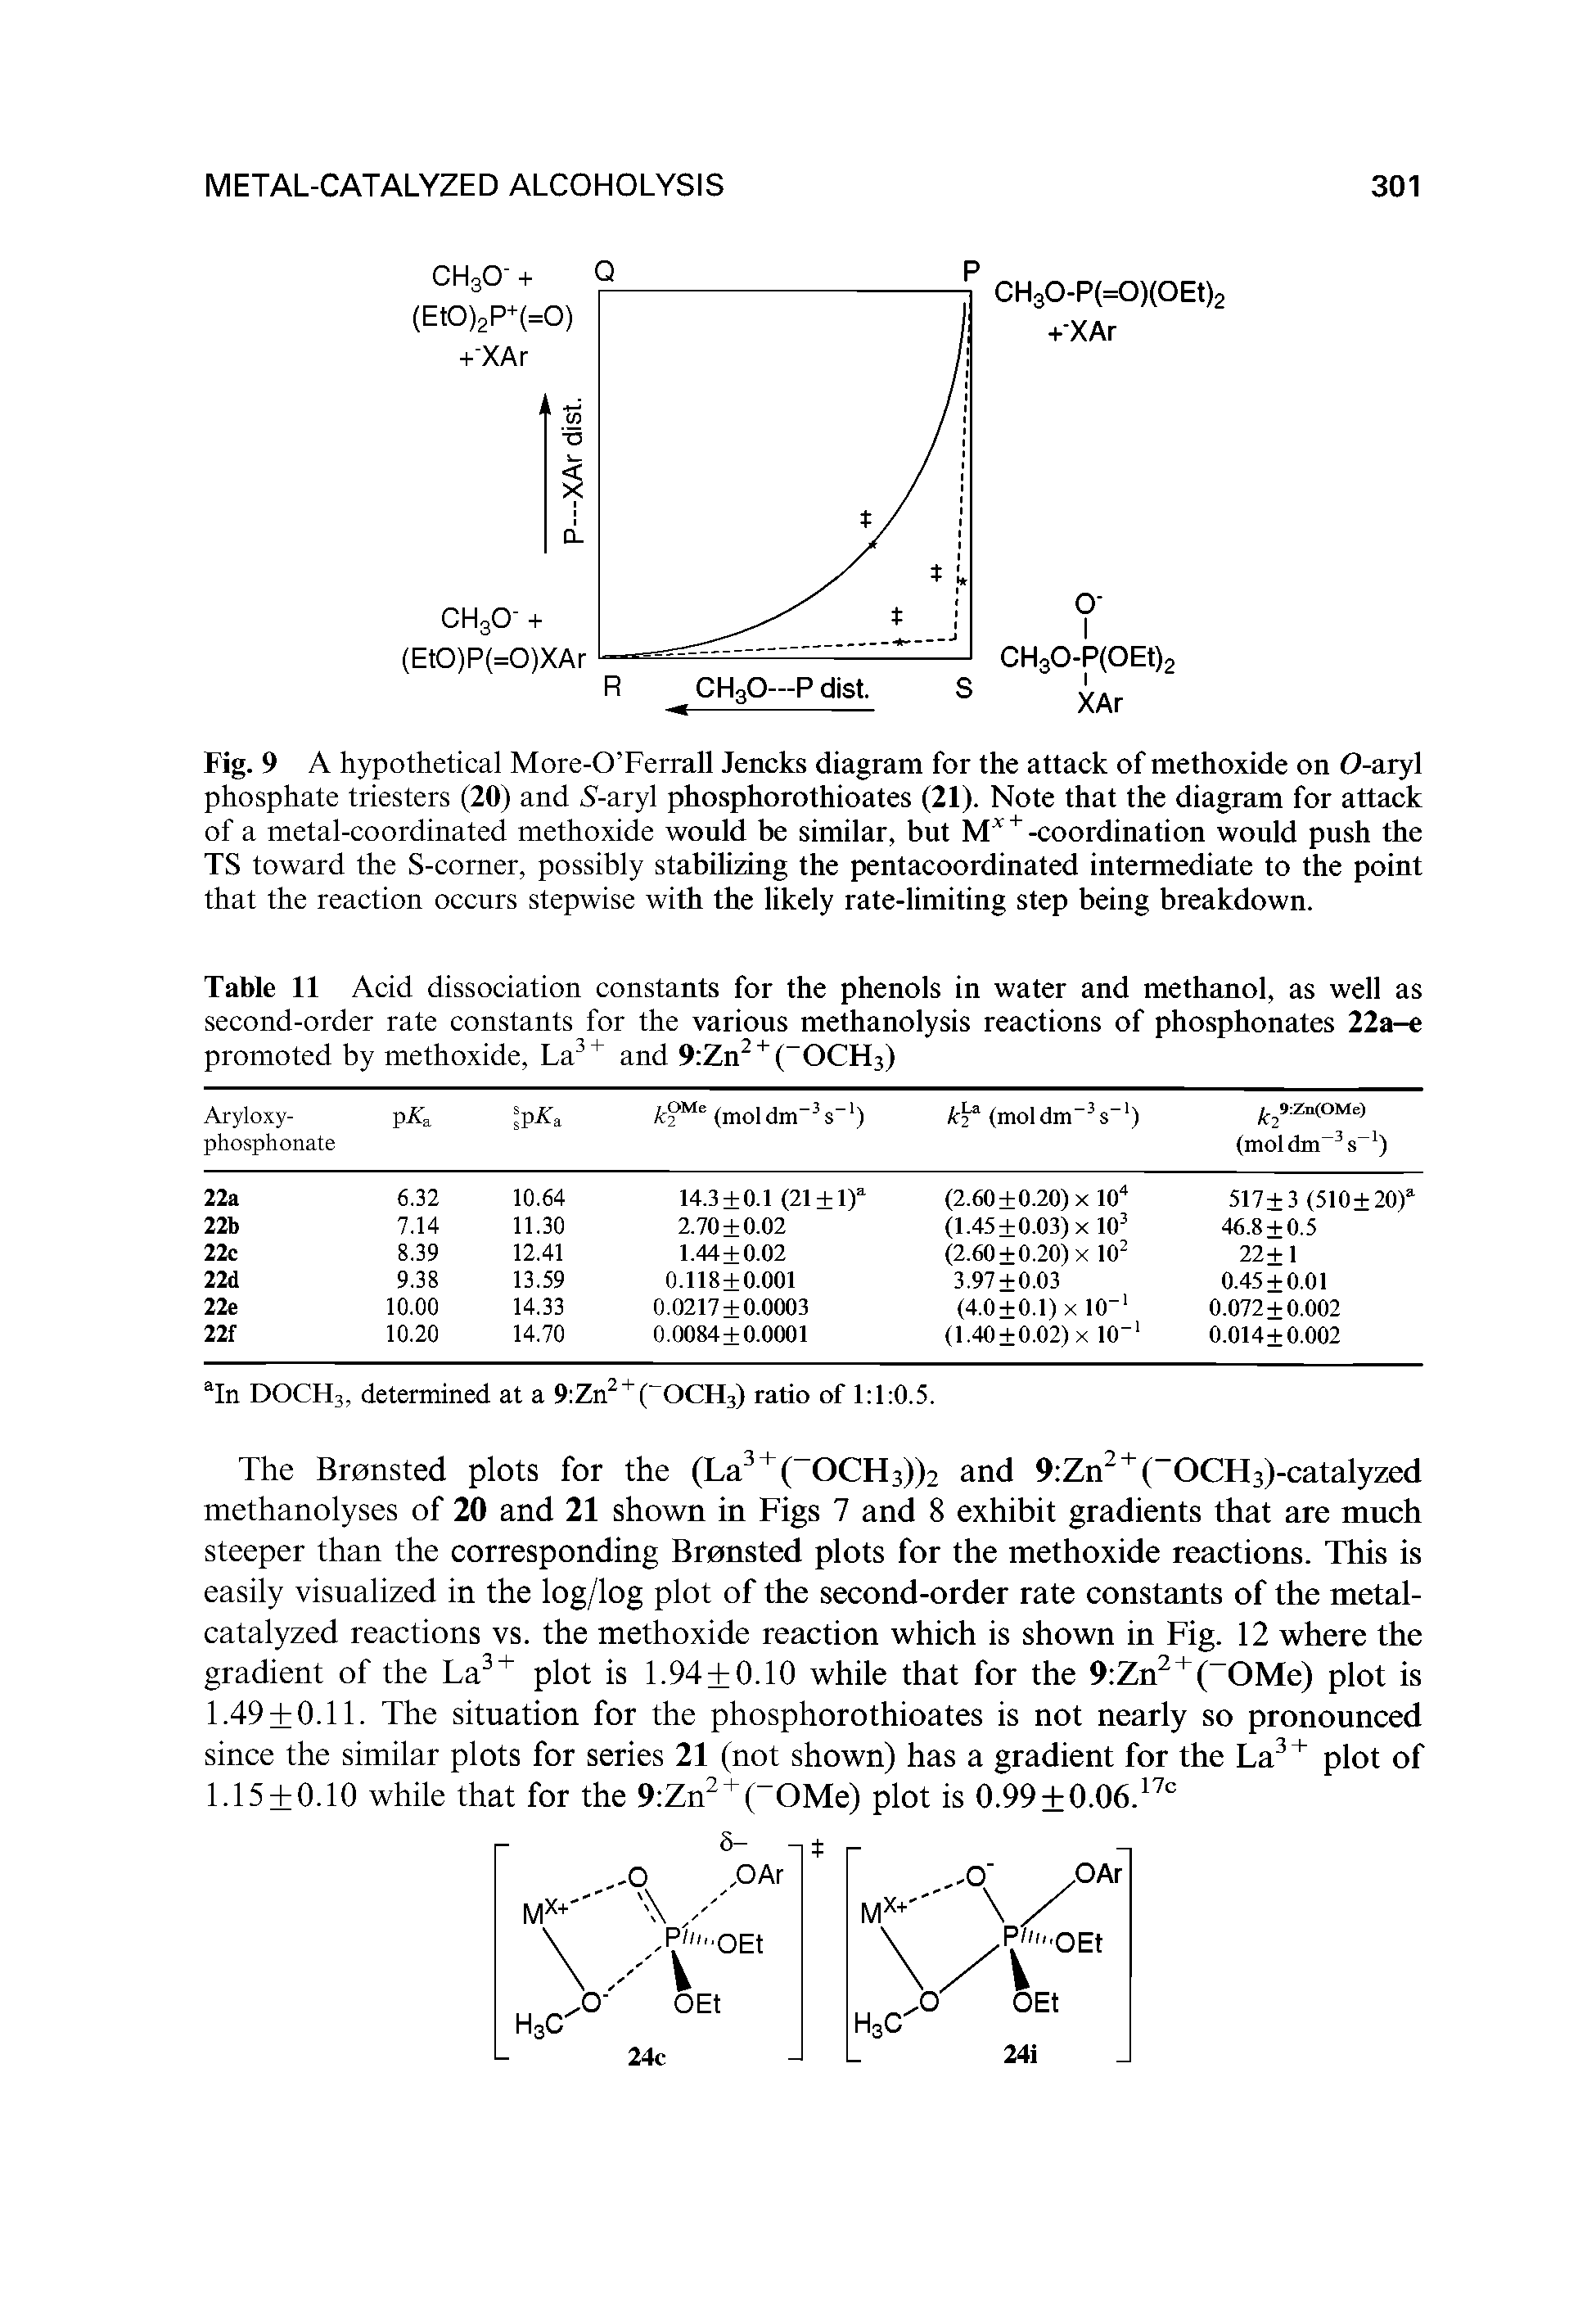 Fig. 9 A hypothetical More-O Ferrall Jencks diagram for the attack of methoxide on O-aryl phosphate triesters (20) and 5-aryl phosphorothioates (21). Note that the diagram for attack of a metal-coordinated methoxide would be similar, but Mx +-coordination would push the TS toward the S-corner, possibly stabilizing the pentacoordinated intermediate to the point that the reaction occurs stepwise with the likely rate-limiting step being breakdown.